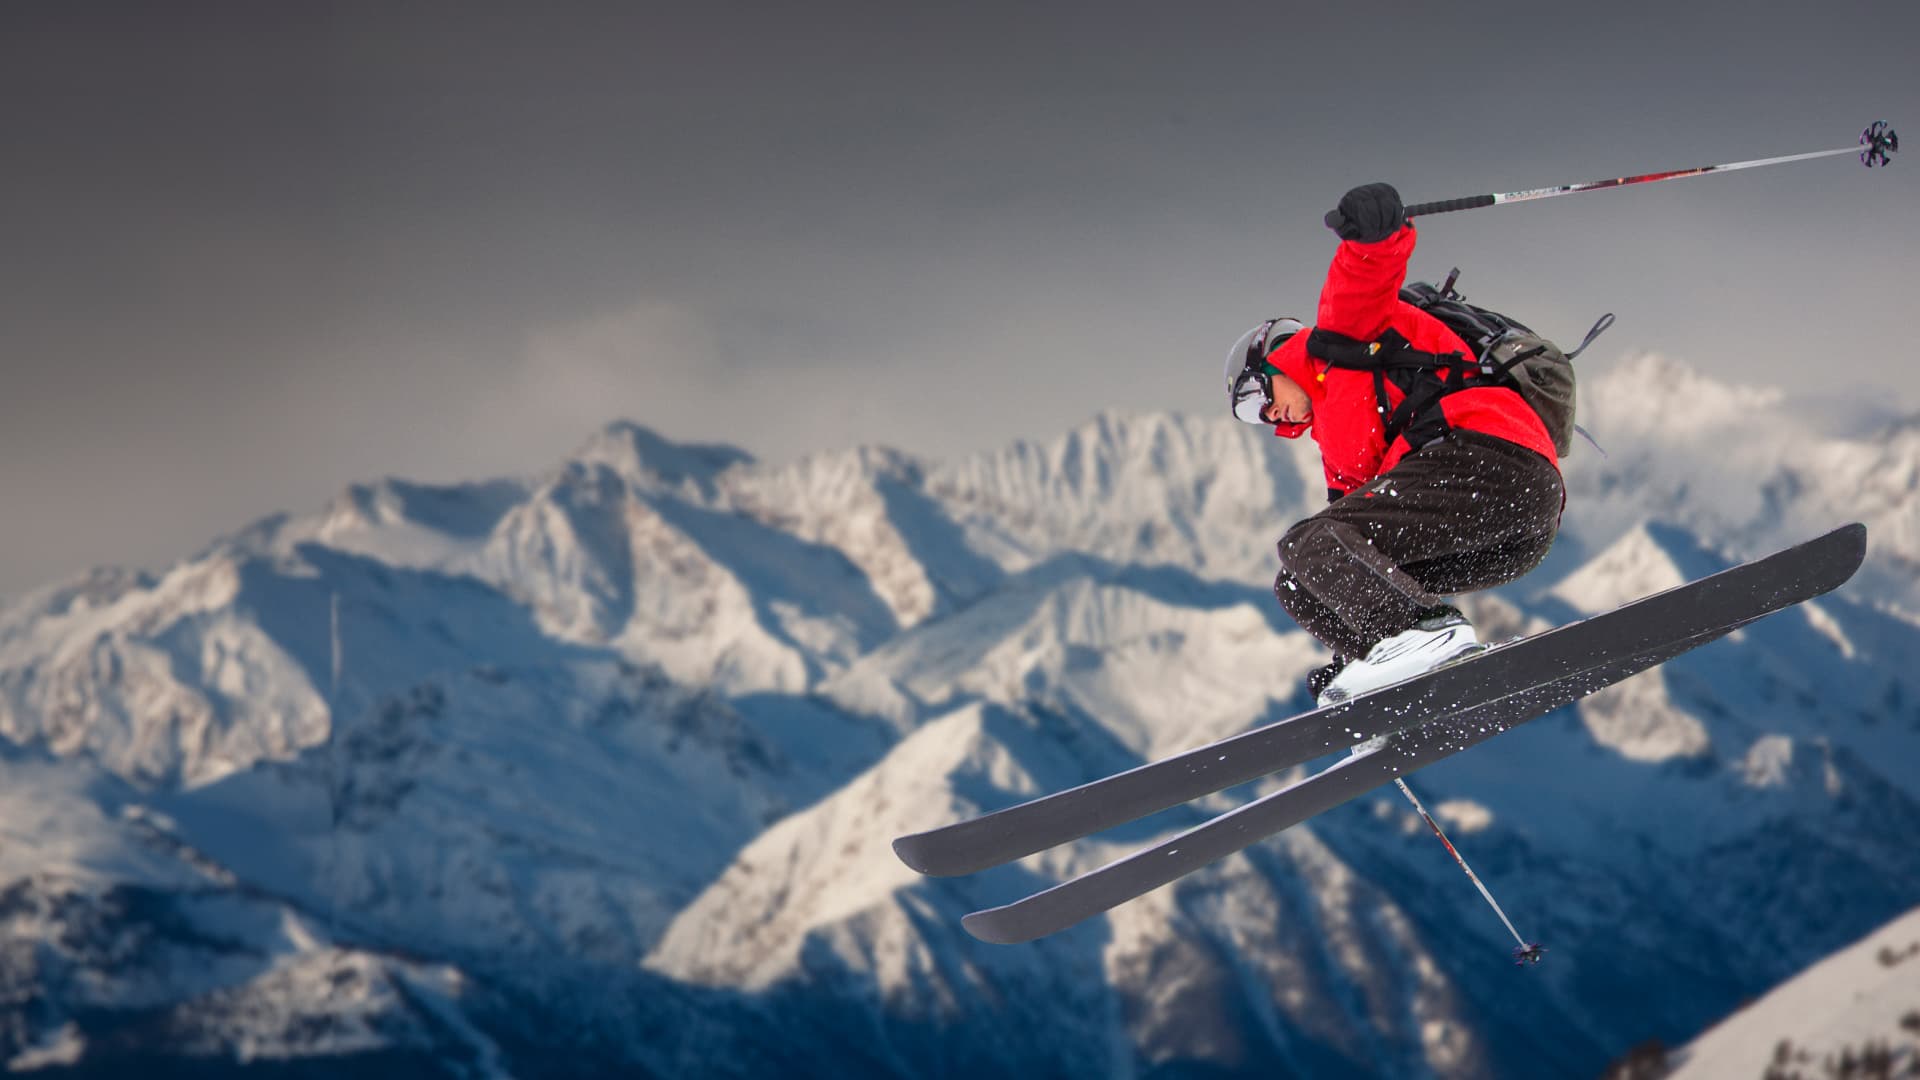 downhill skier in red jacket mid jump with snowy mountains in the background